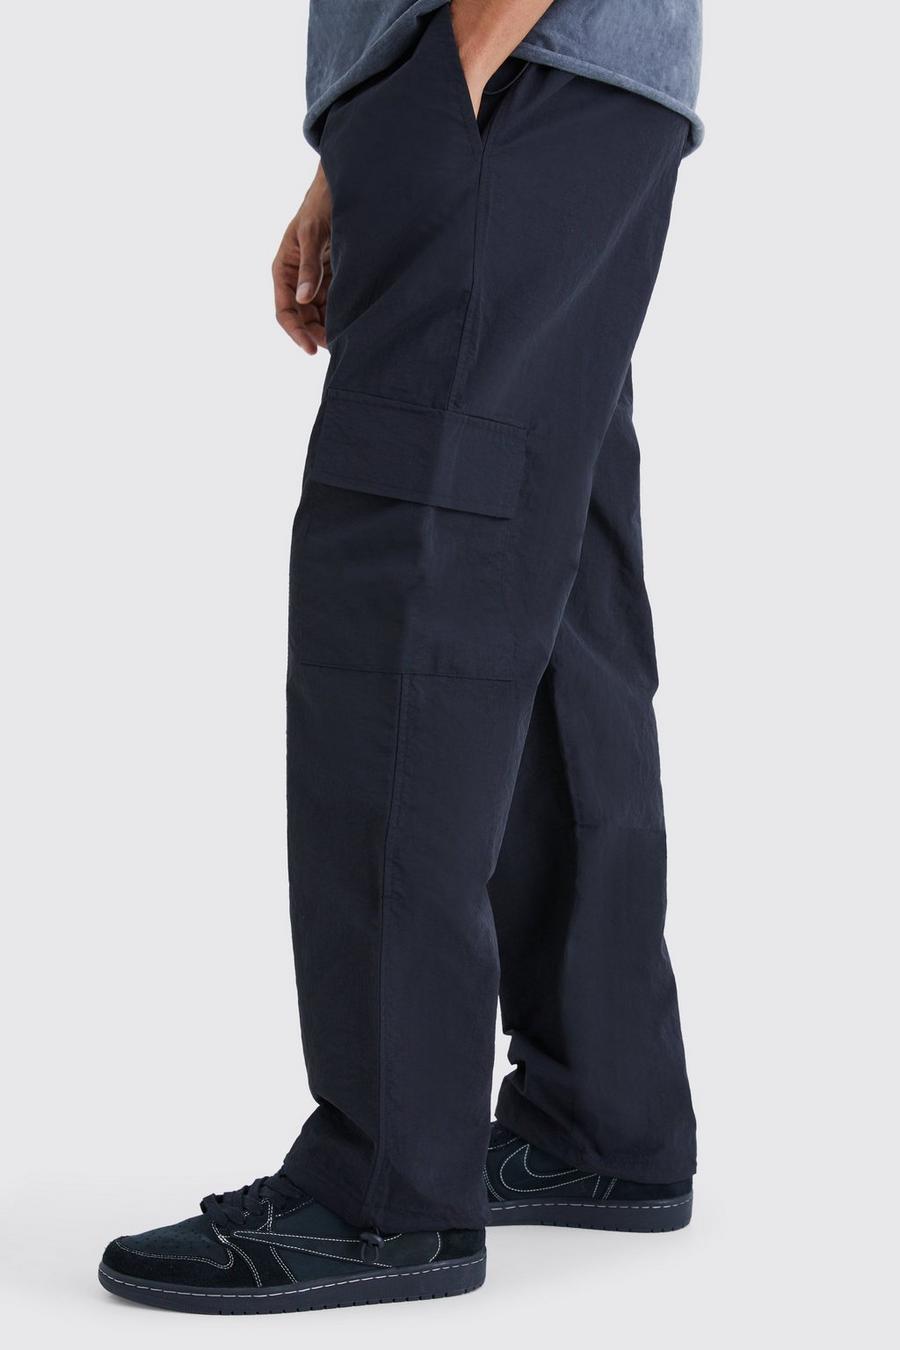 Black Relaxed Contrast Stitch Ripstop Seam Detail Trouser